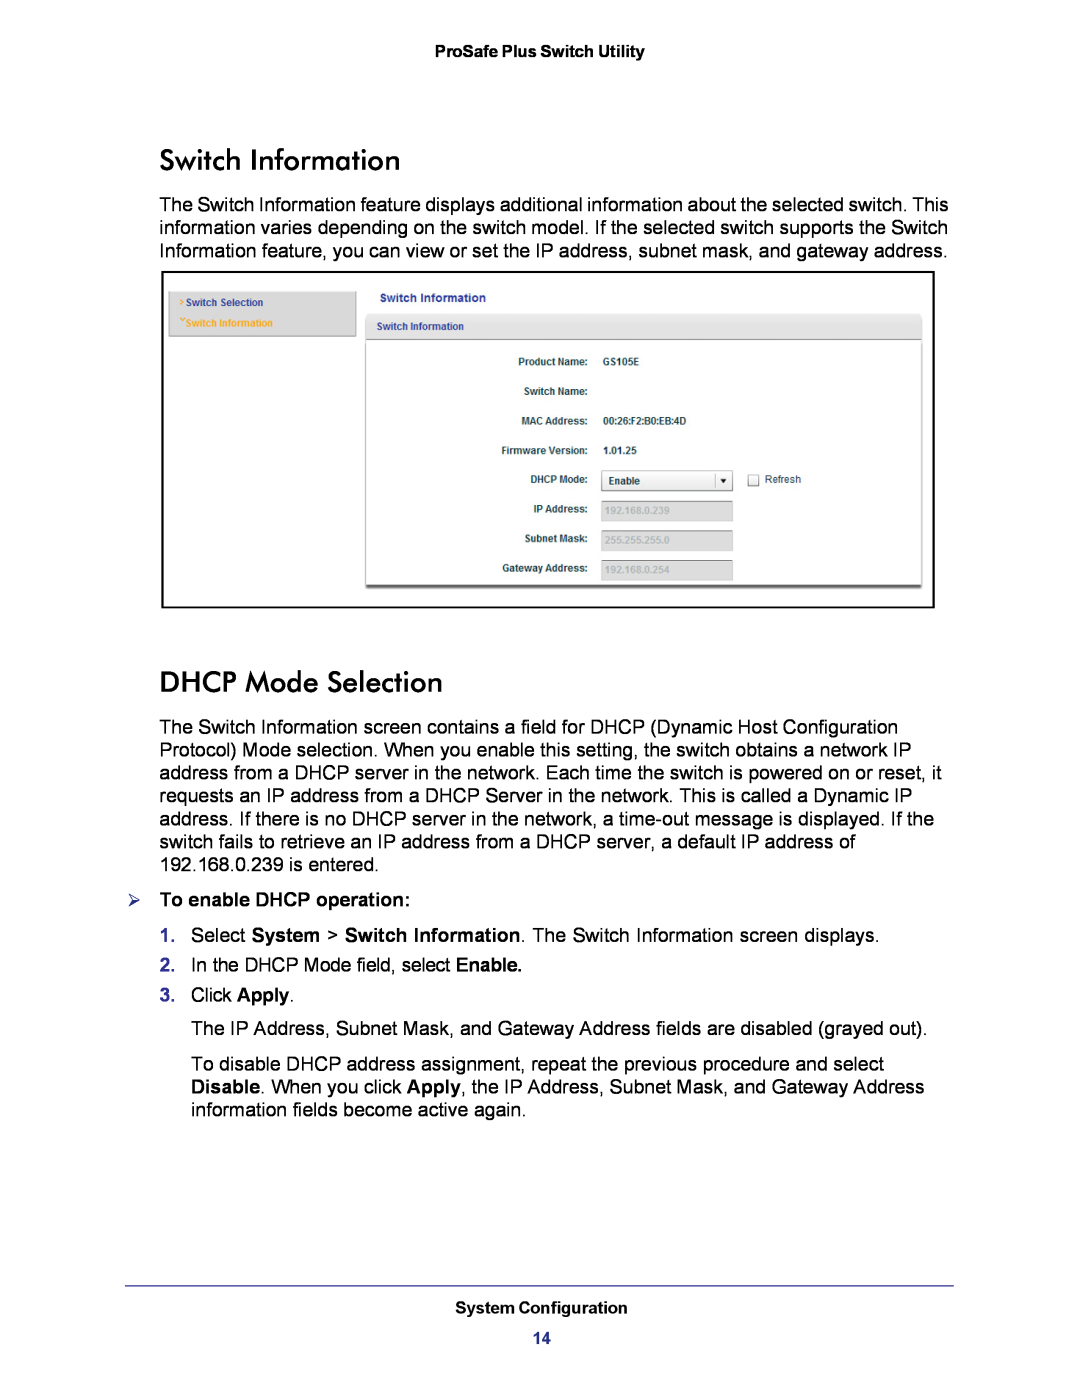 NETGEAR JGS524E-100NAS manual Switch Information, DHCP Mode Selection,  To enable DHCP operation 